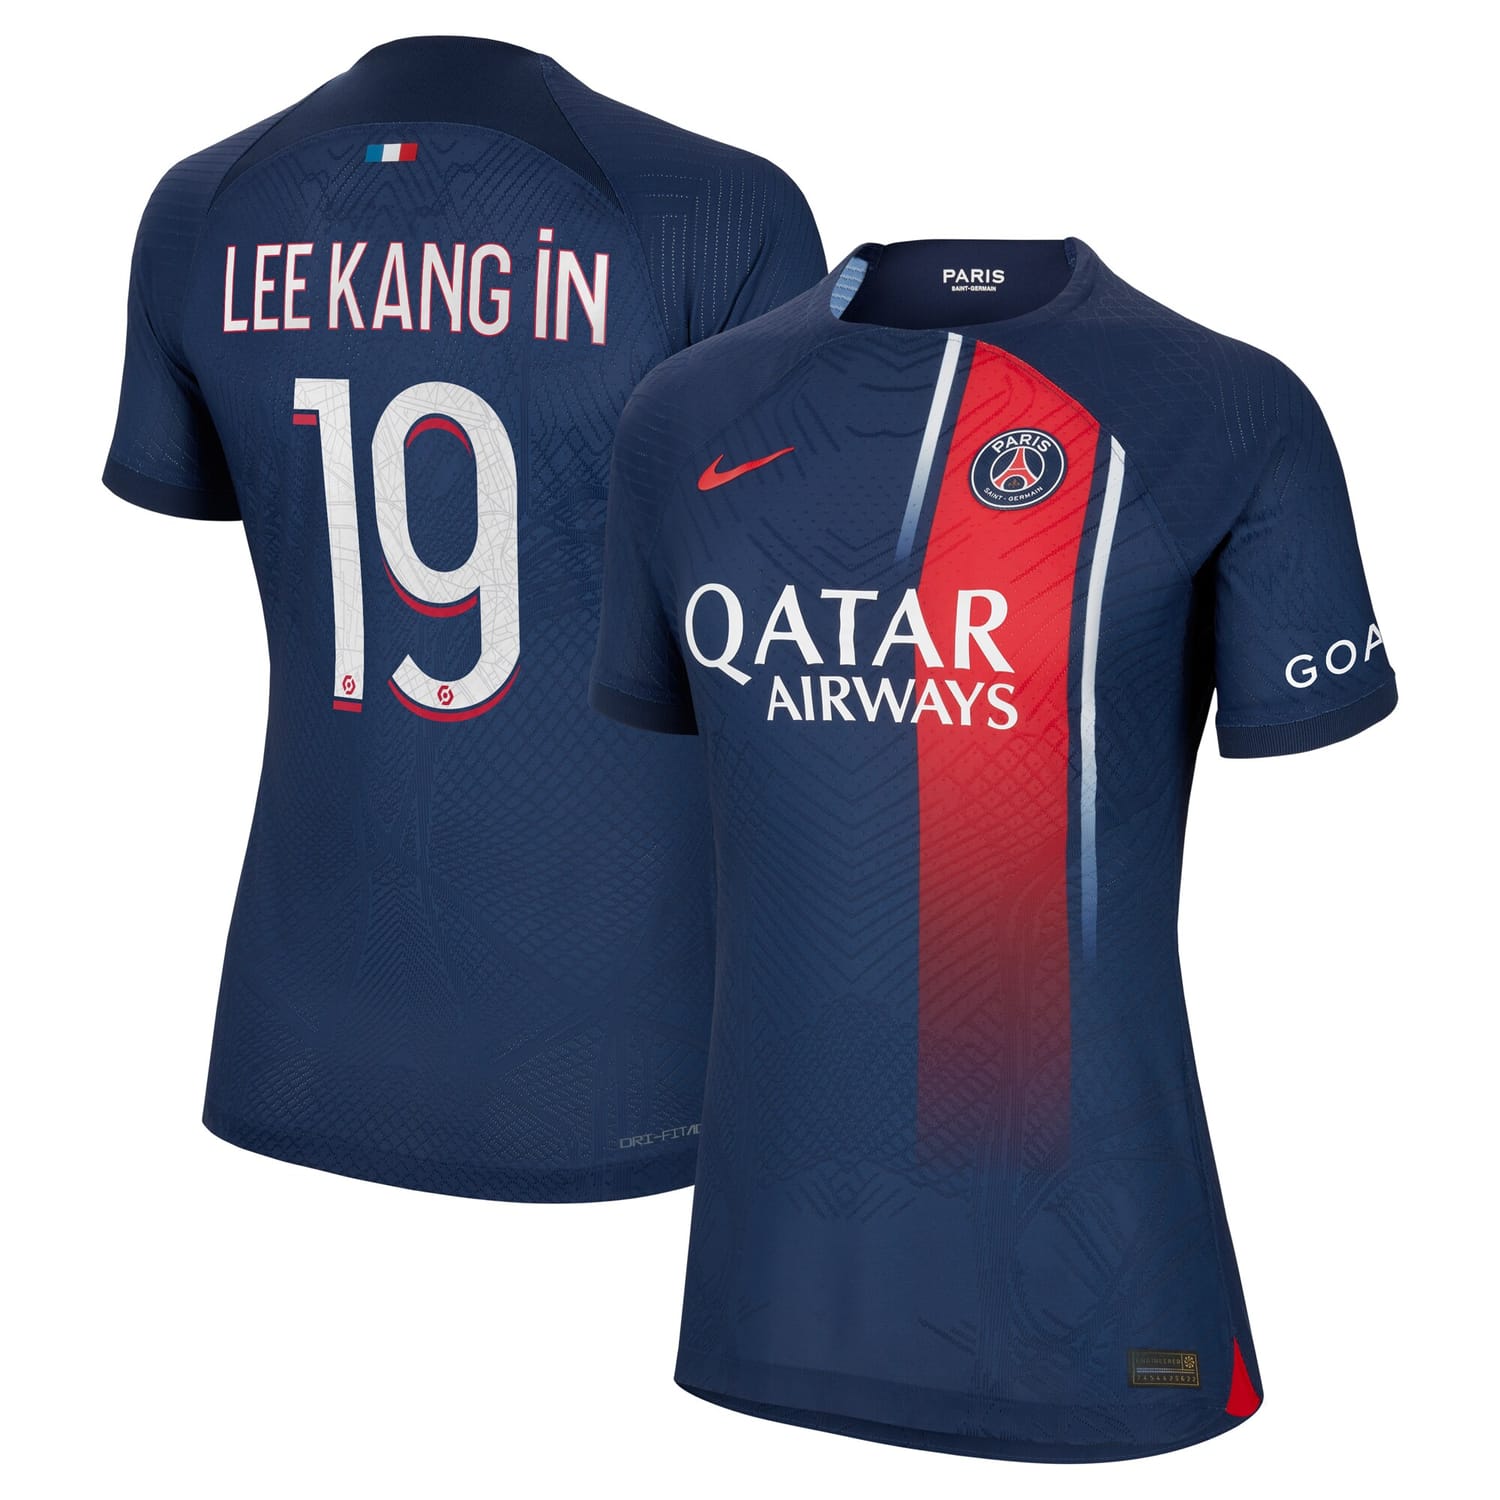 Ligue 1 Paris Saint-Germain Home Authentic Jersey Shirt Navy 2023-24 player Lee Kang In printing for Women